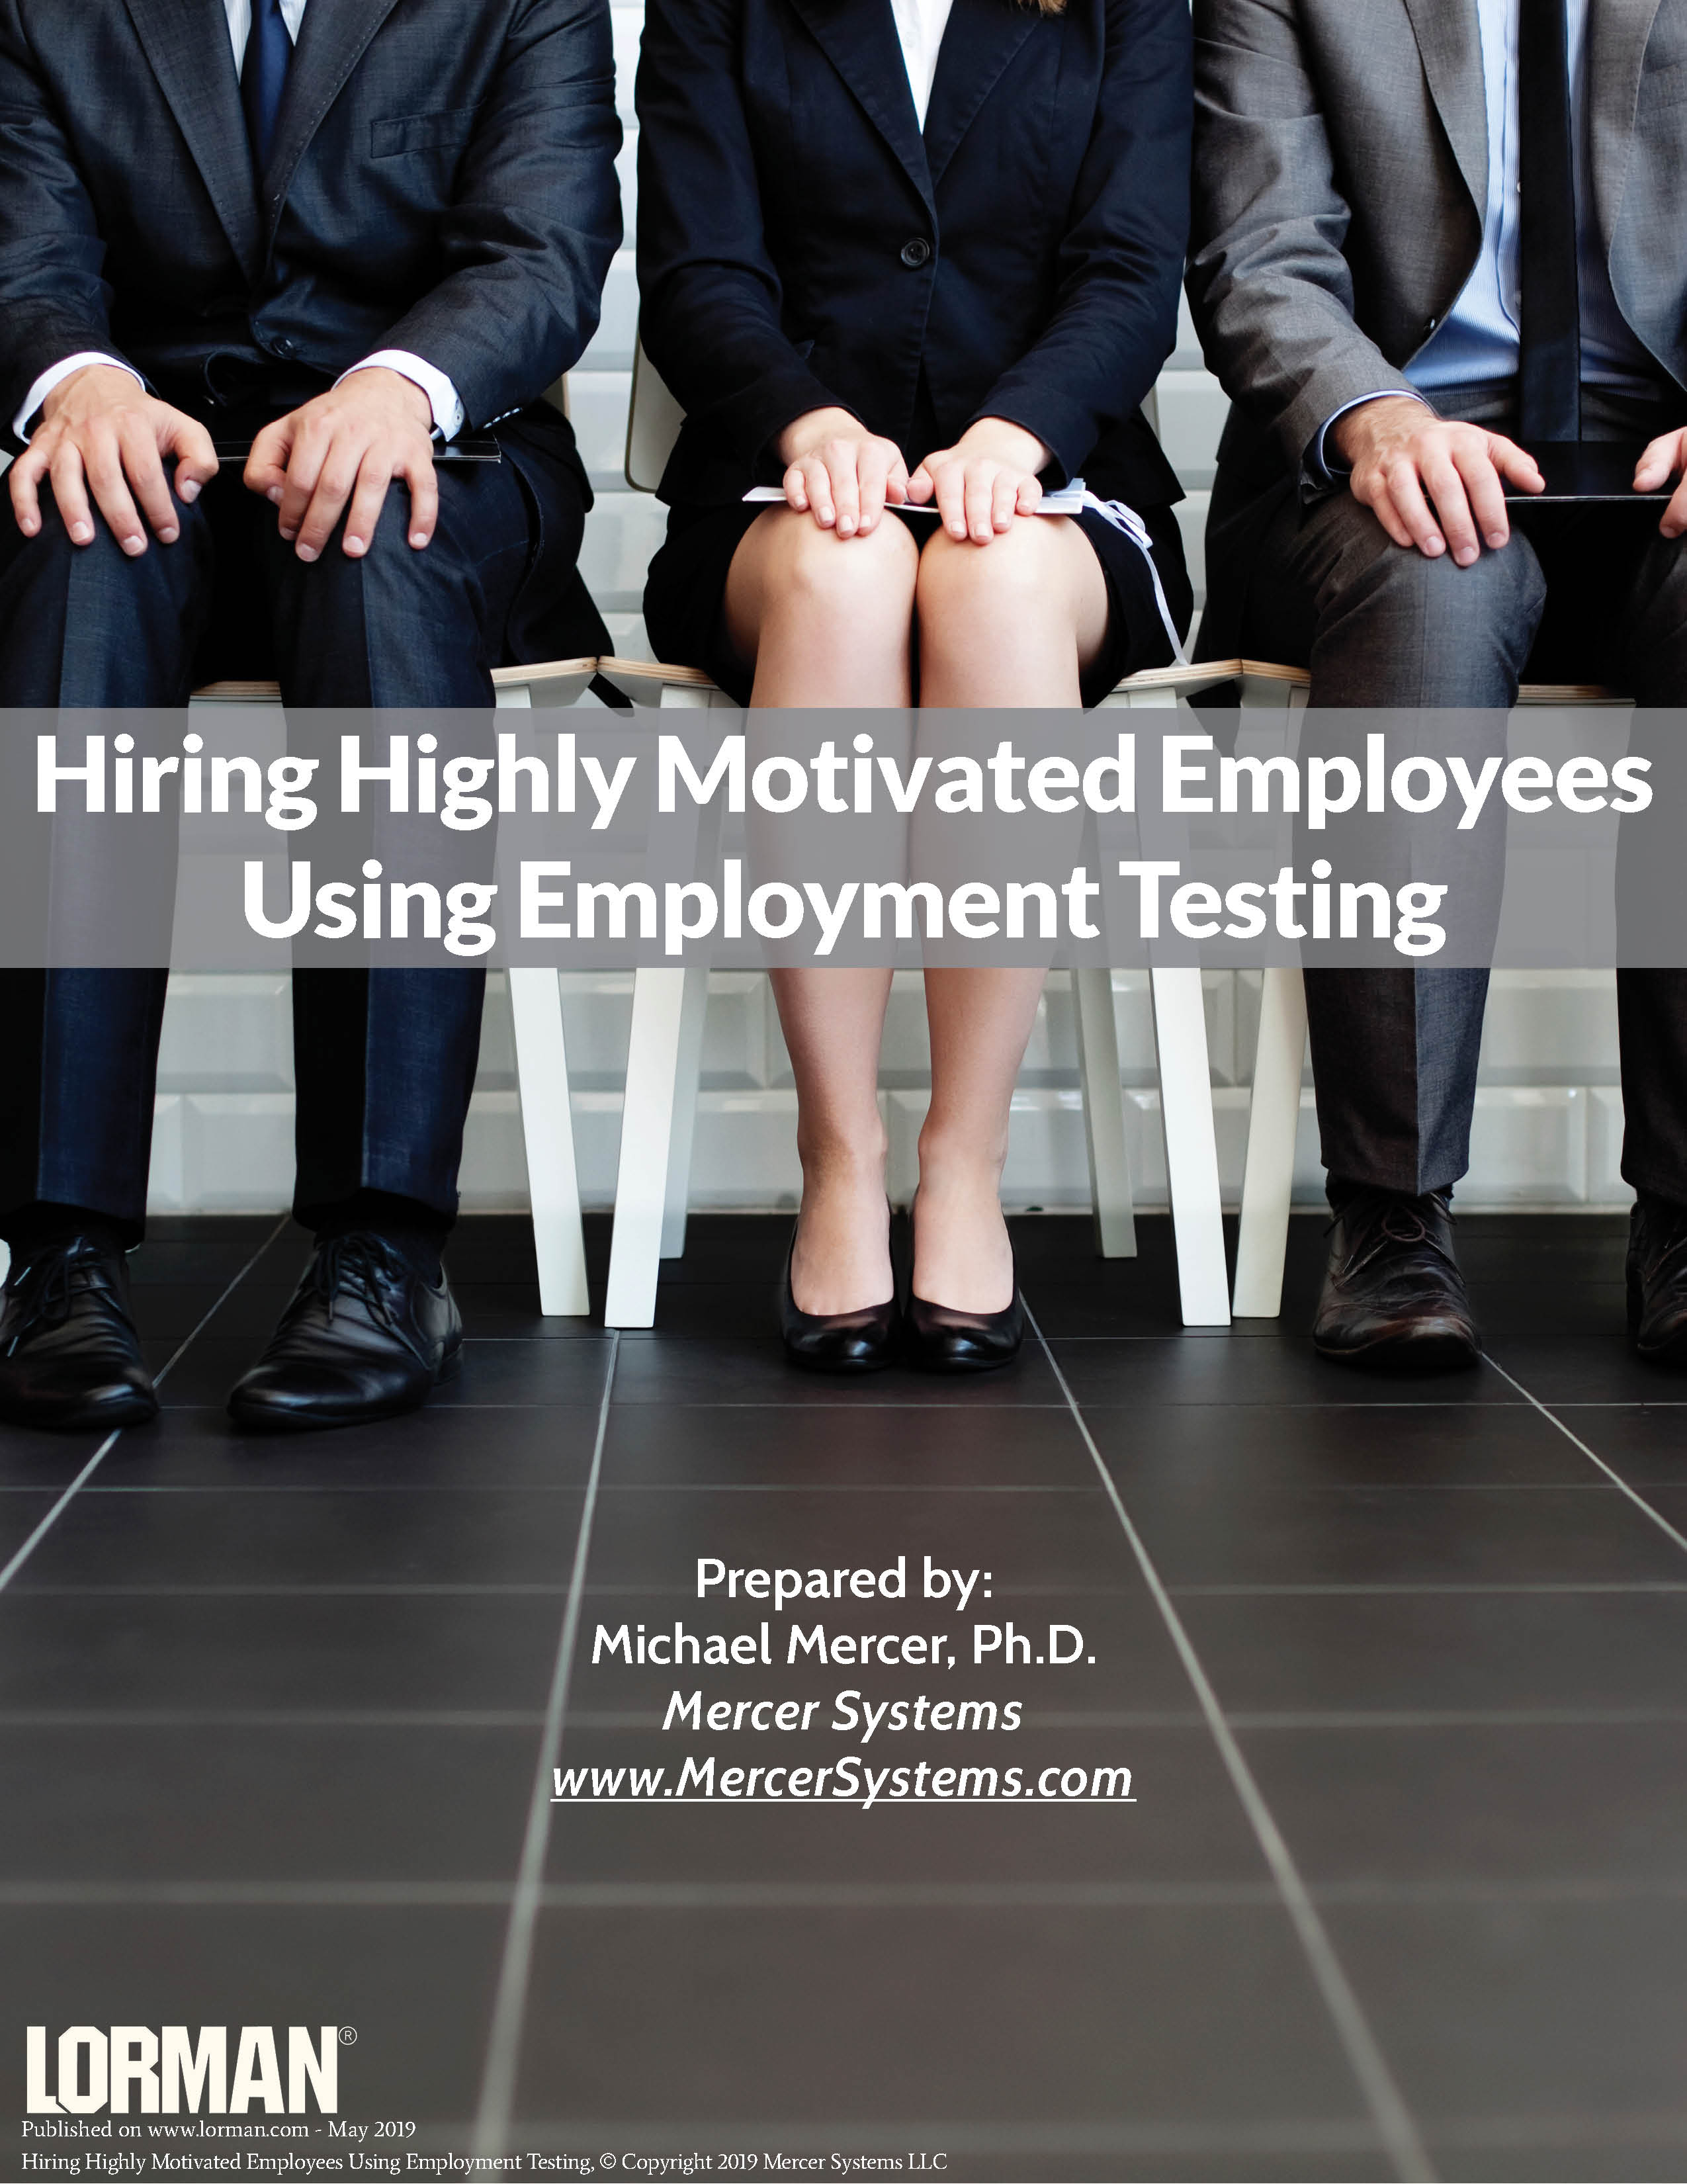 Hiring Highly Motivated Employees Using Employment Testing